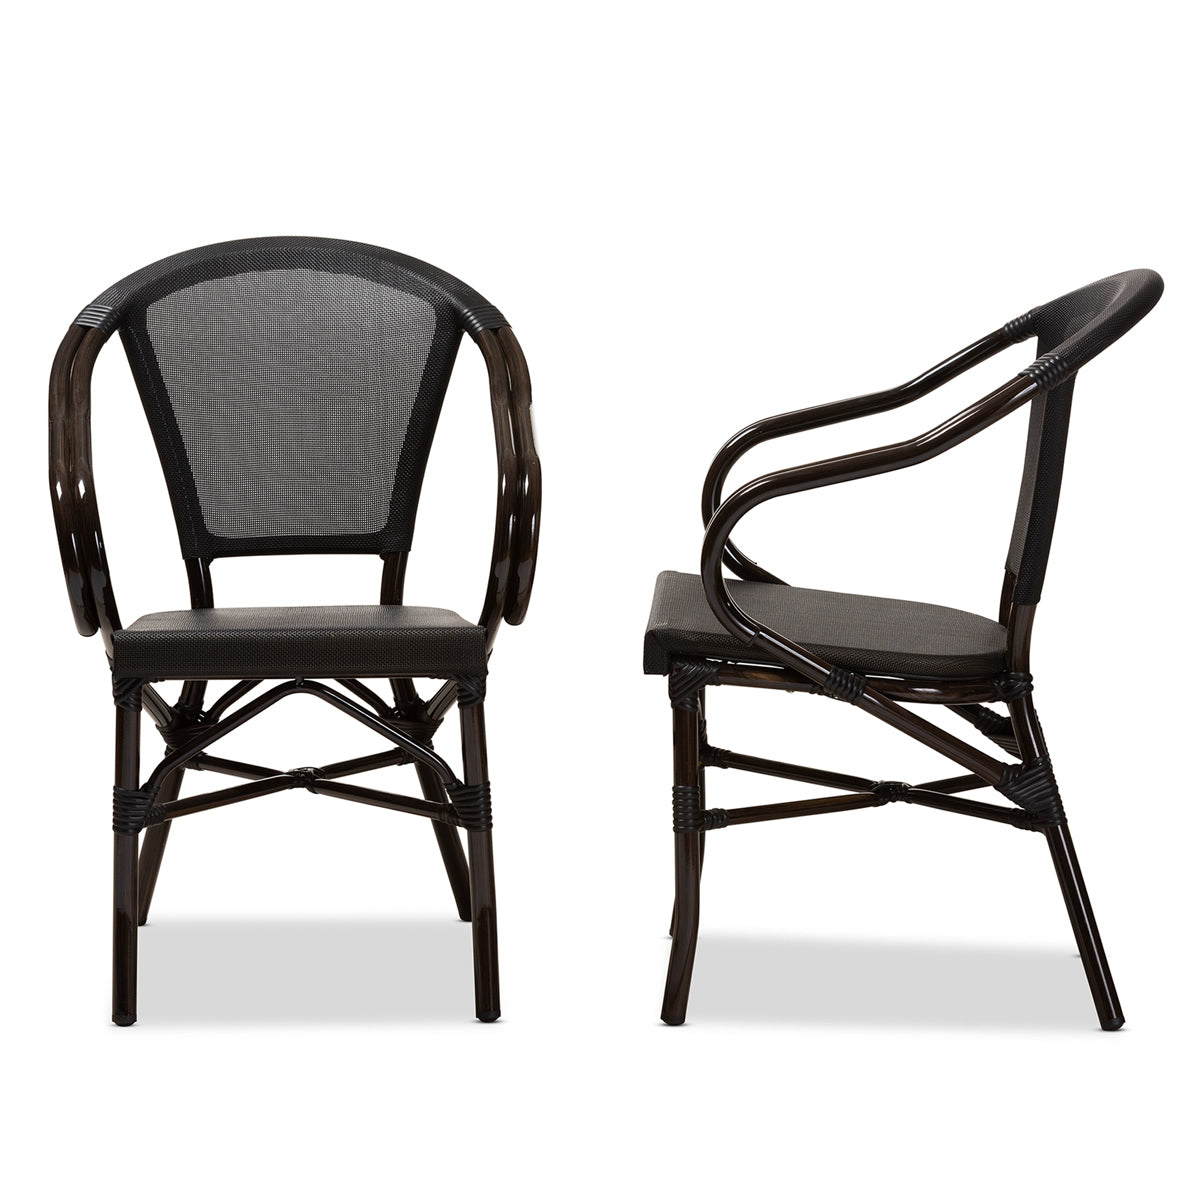 Baxton Studio Artus Classic French Indoor and Outdoor Black Bamboo Style Stackable Bistro Dining Chair Set of 2 Baxton Studio-dining chair-Minimal And Modern - 3